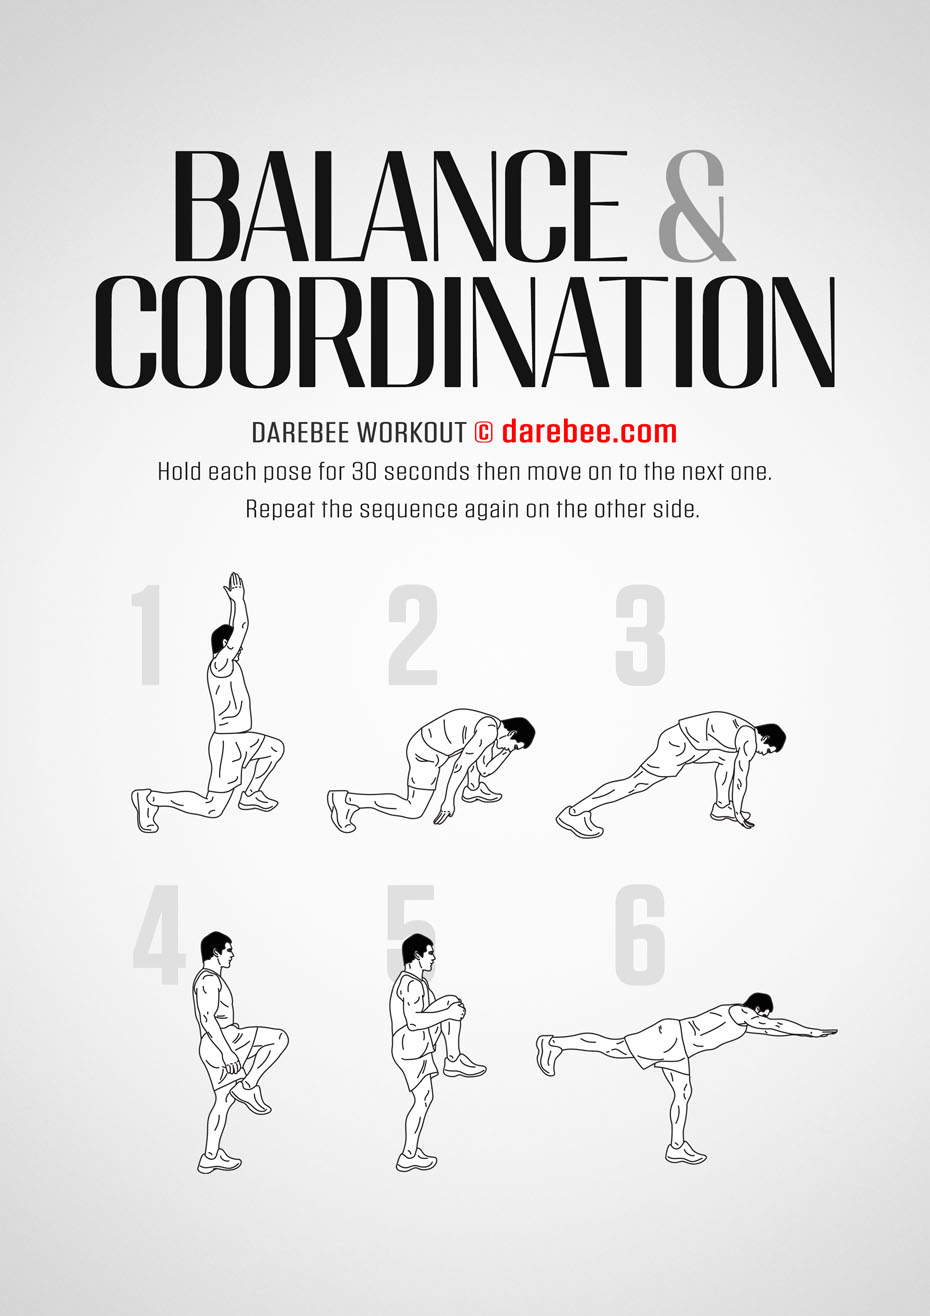 Balance and coordination exercises